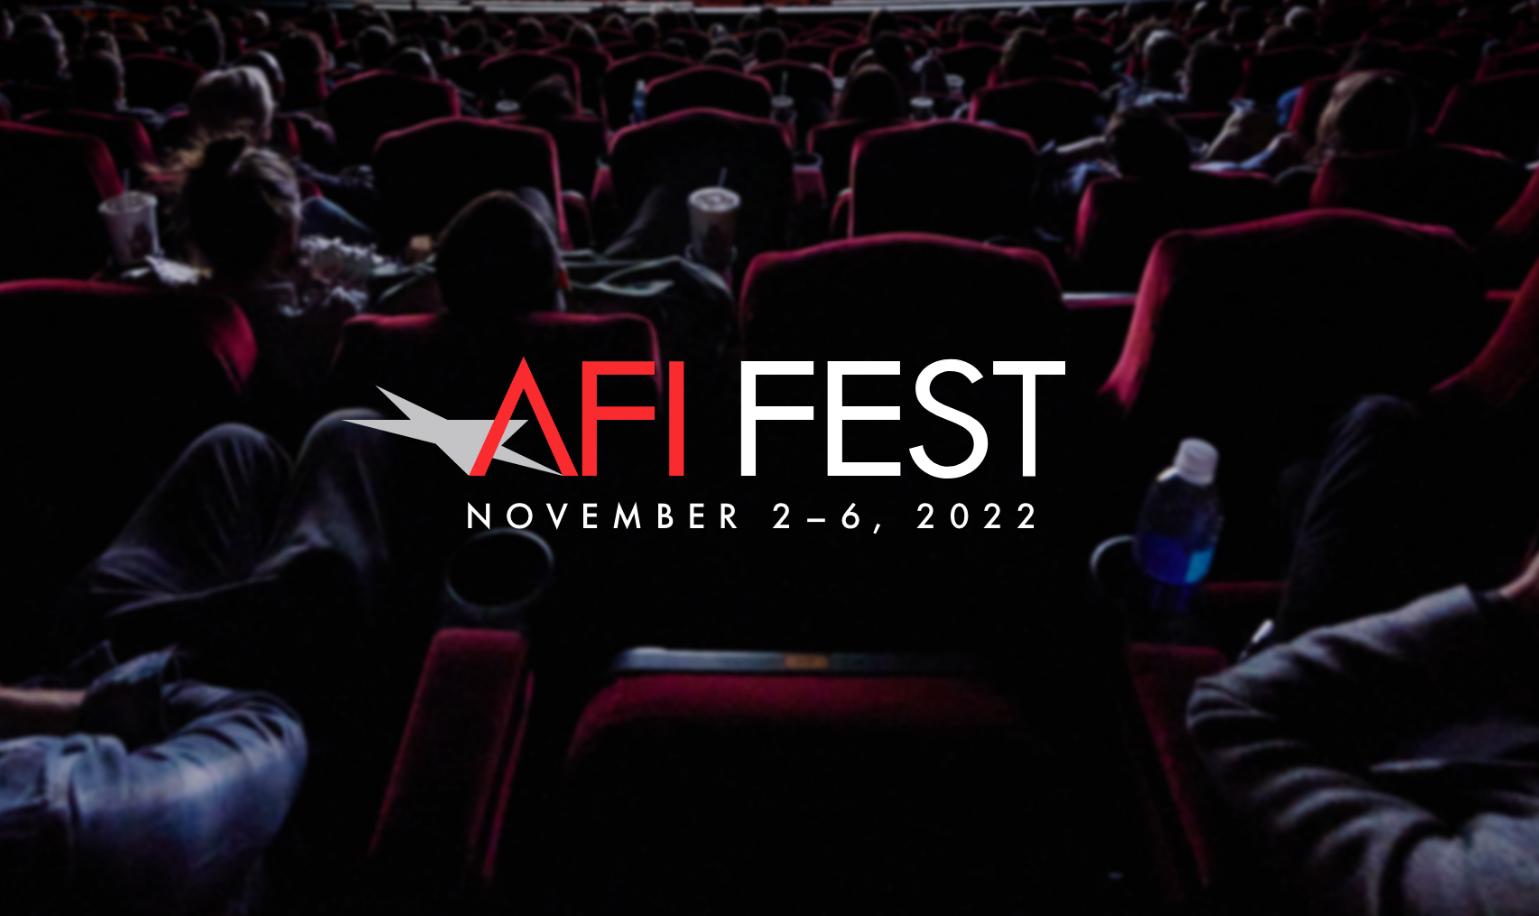 Powerful queer films from across the globe ignite AFI Fest 2022 pic